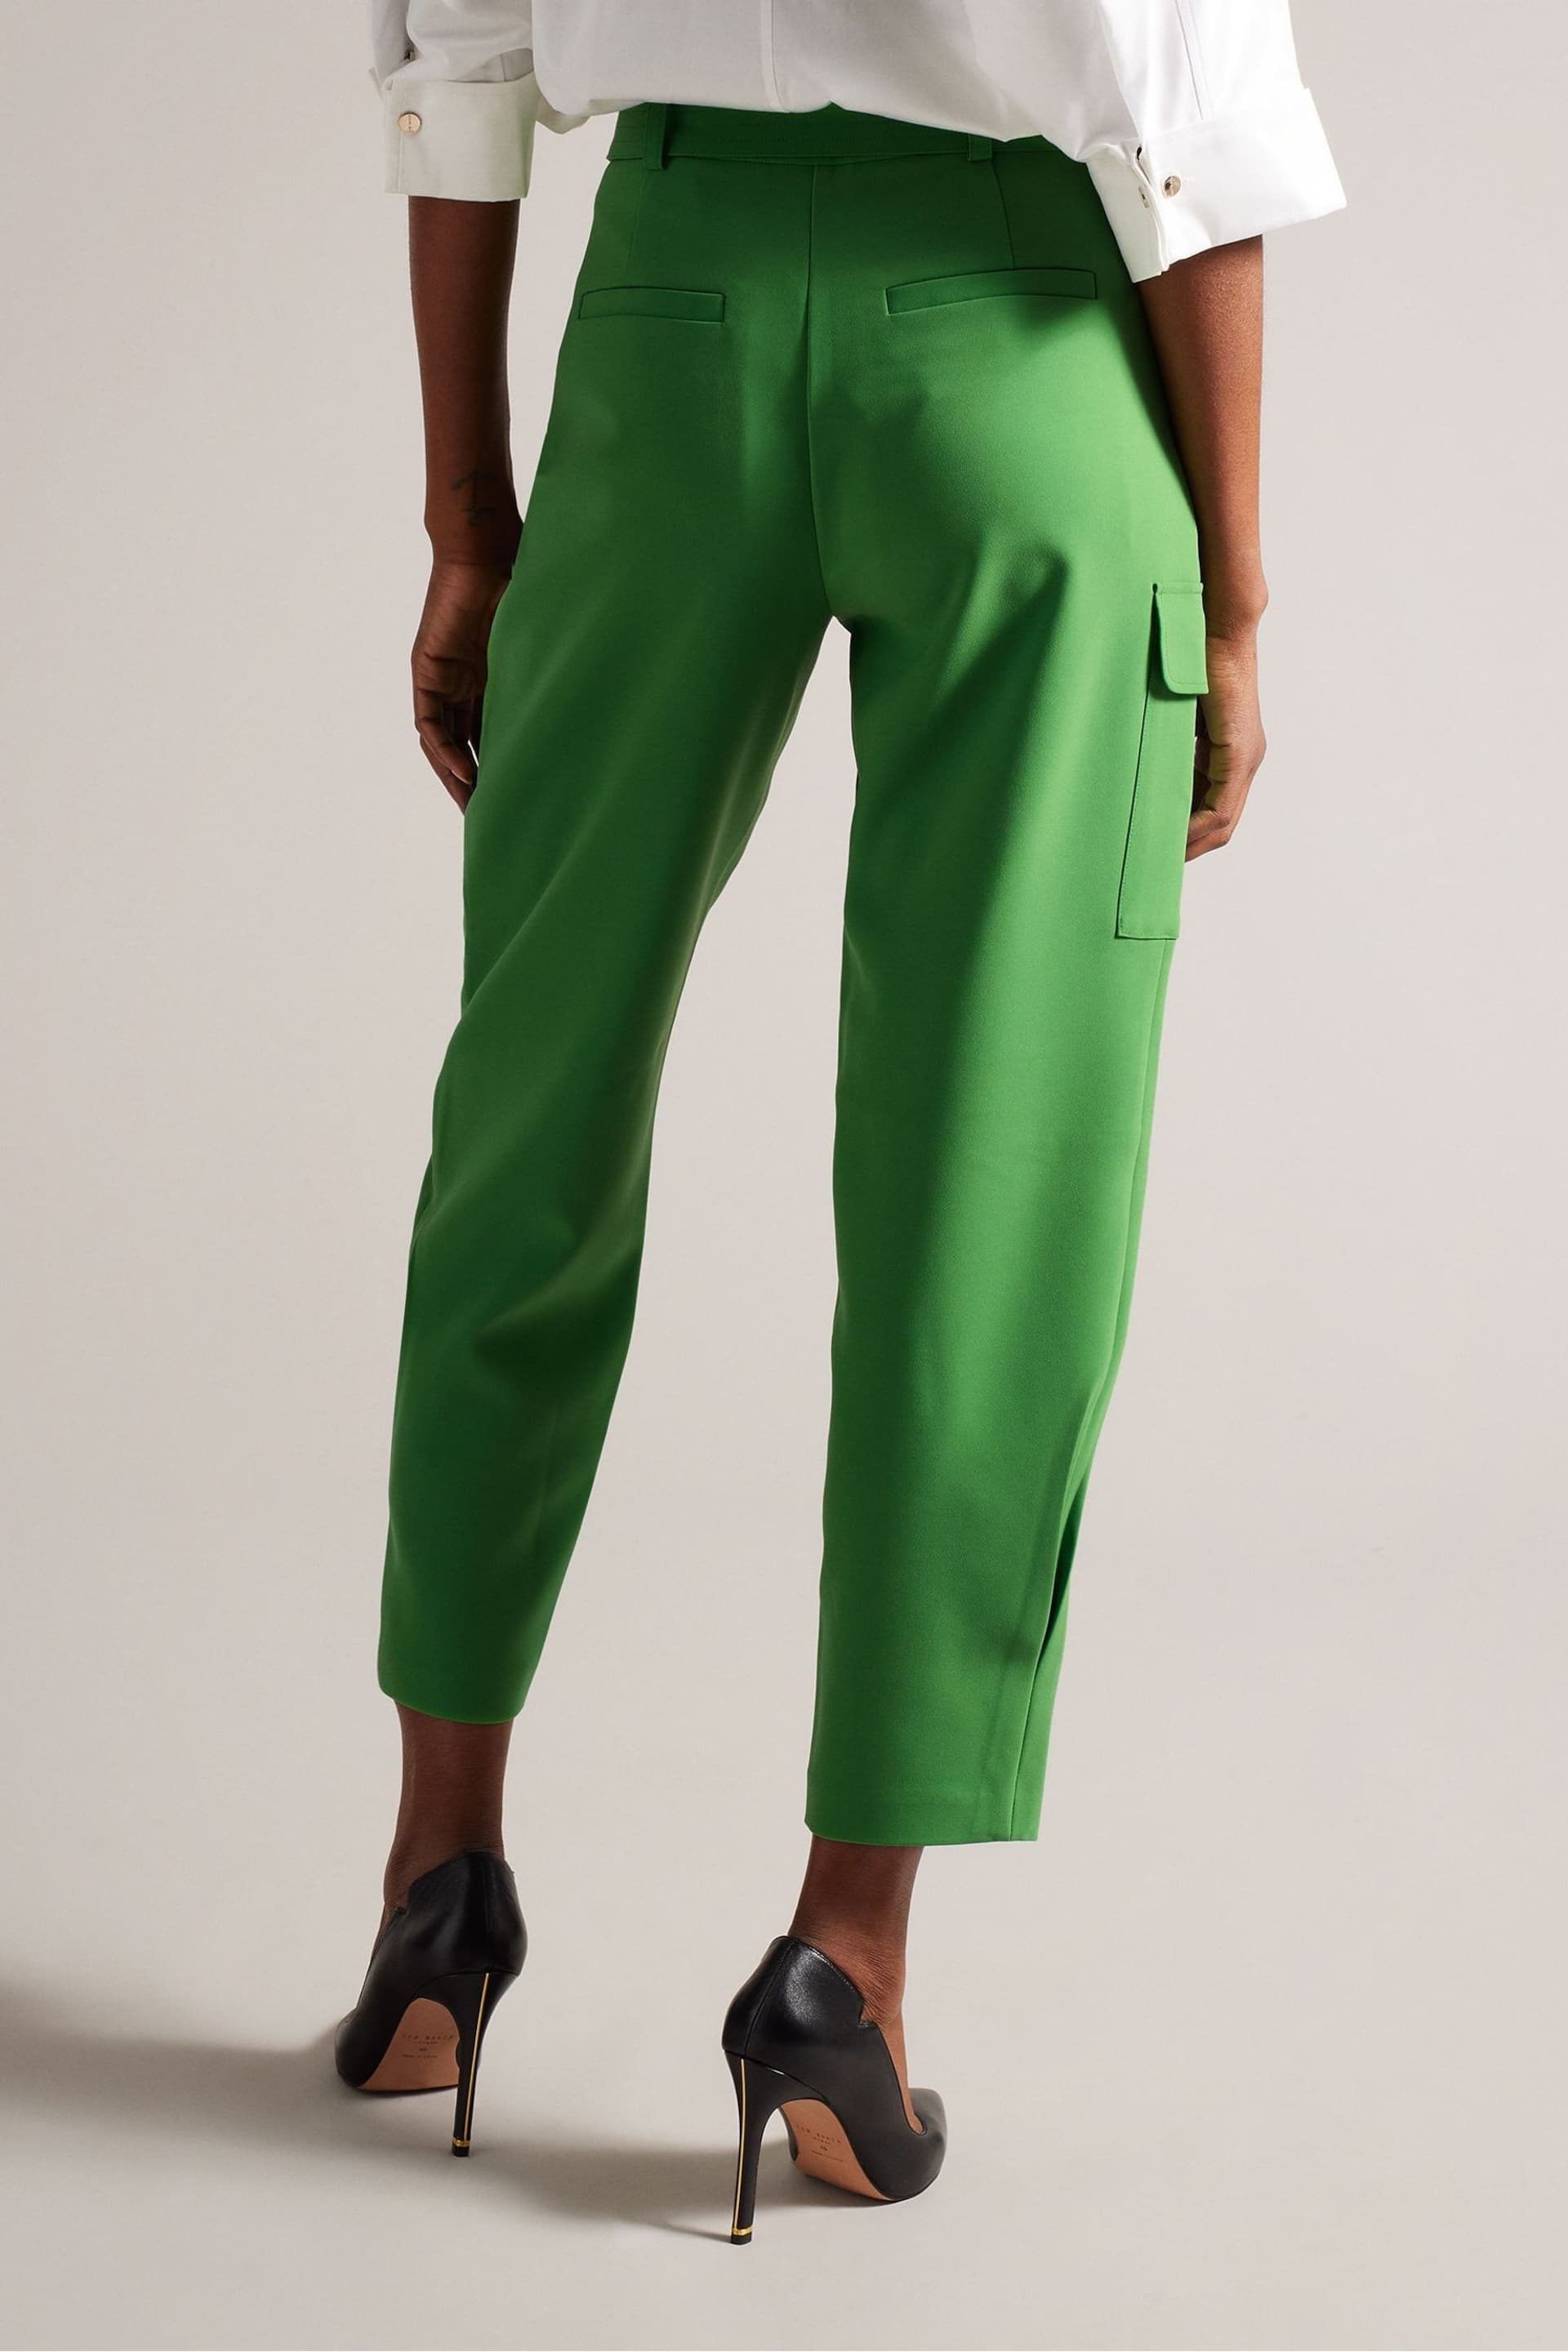 Ted Baker Green Gracieh High Waisted Belted Tapered Cargo Trousers - Image 3 of 5